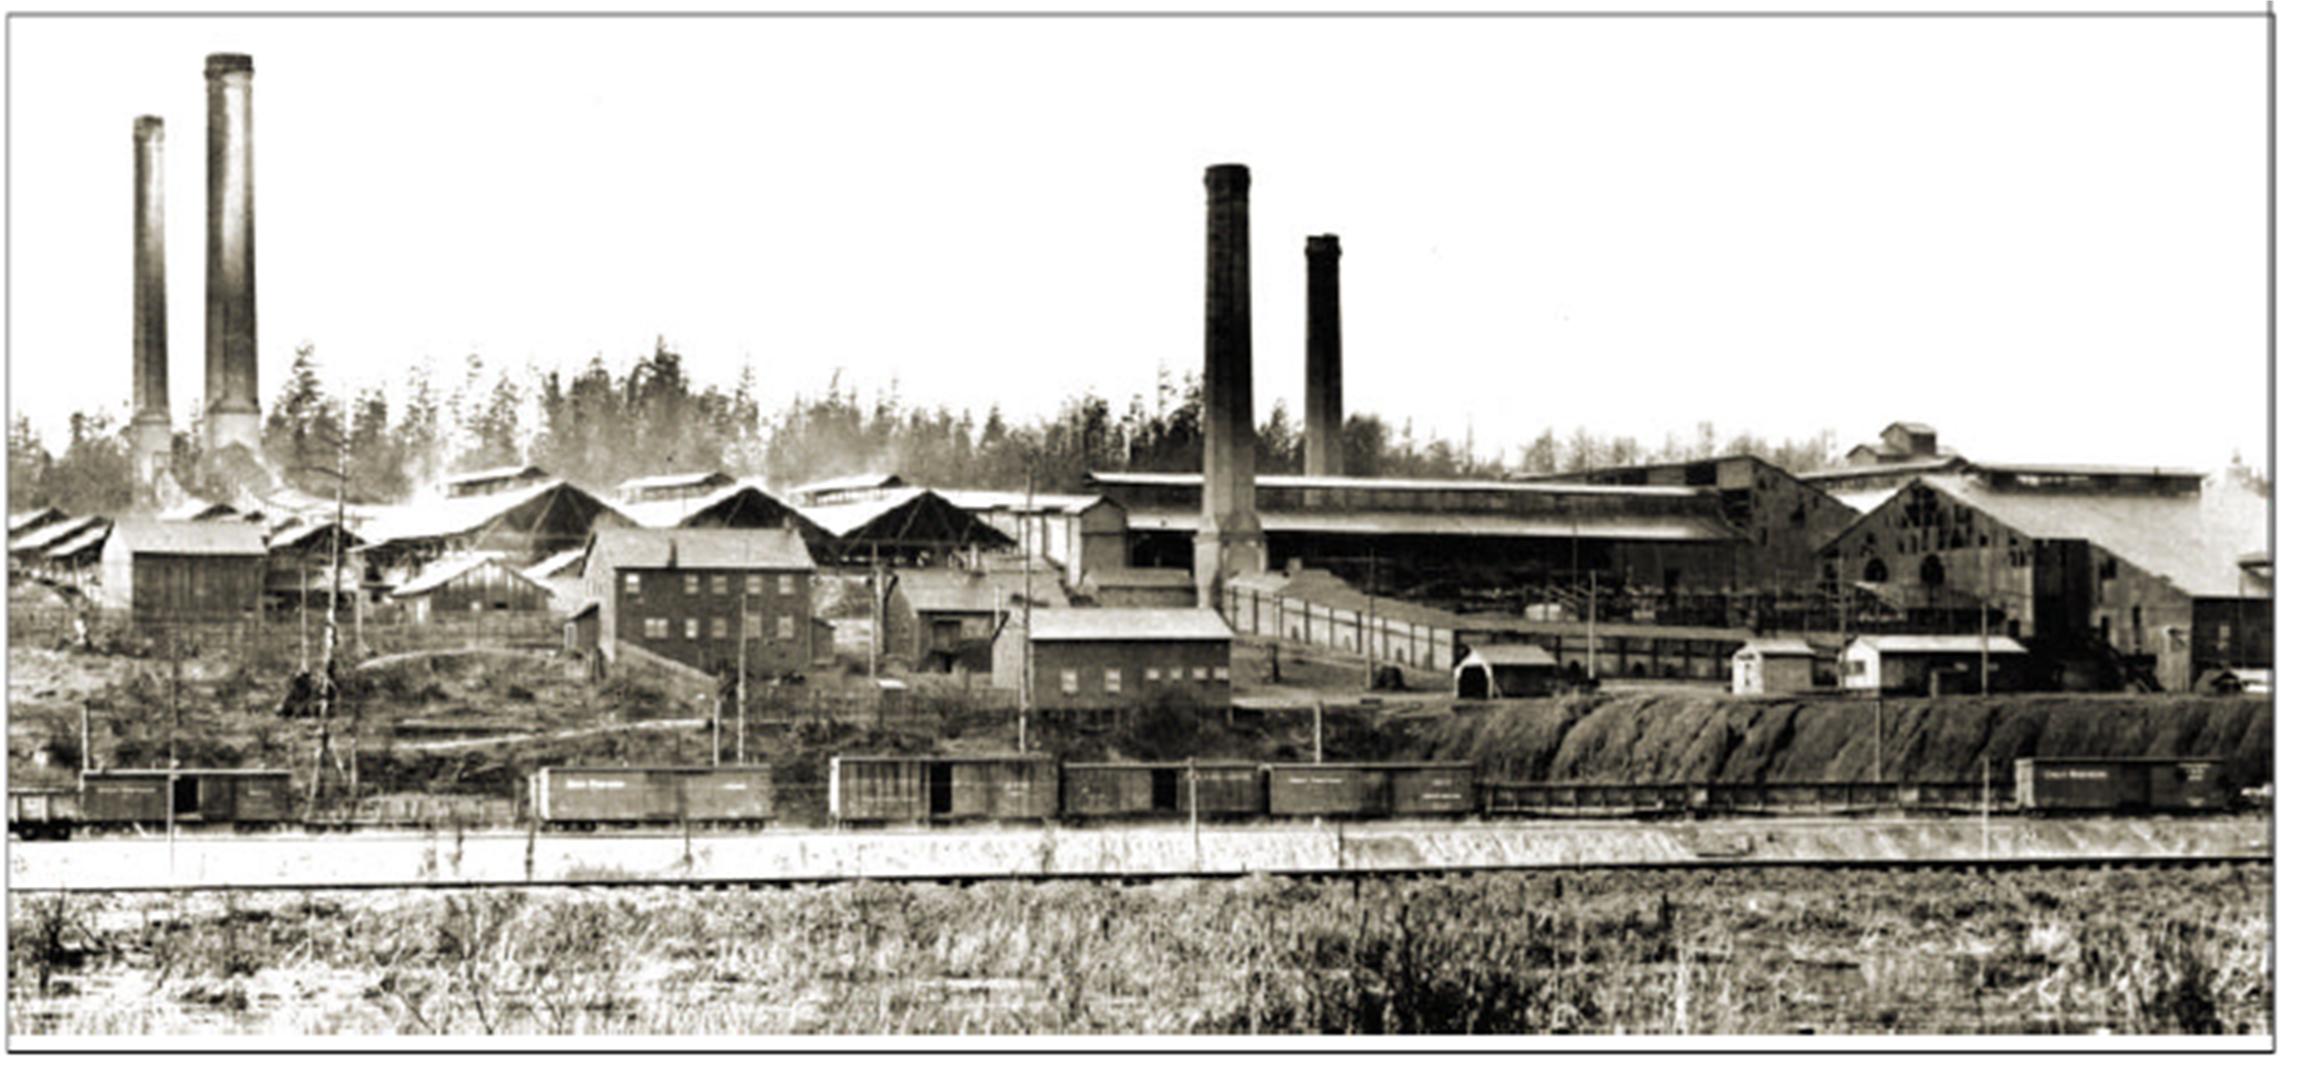 Historic photo of the Everett smelter